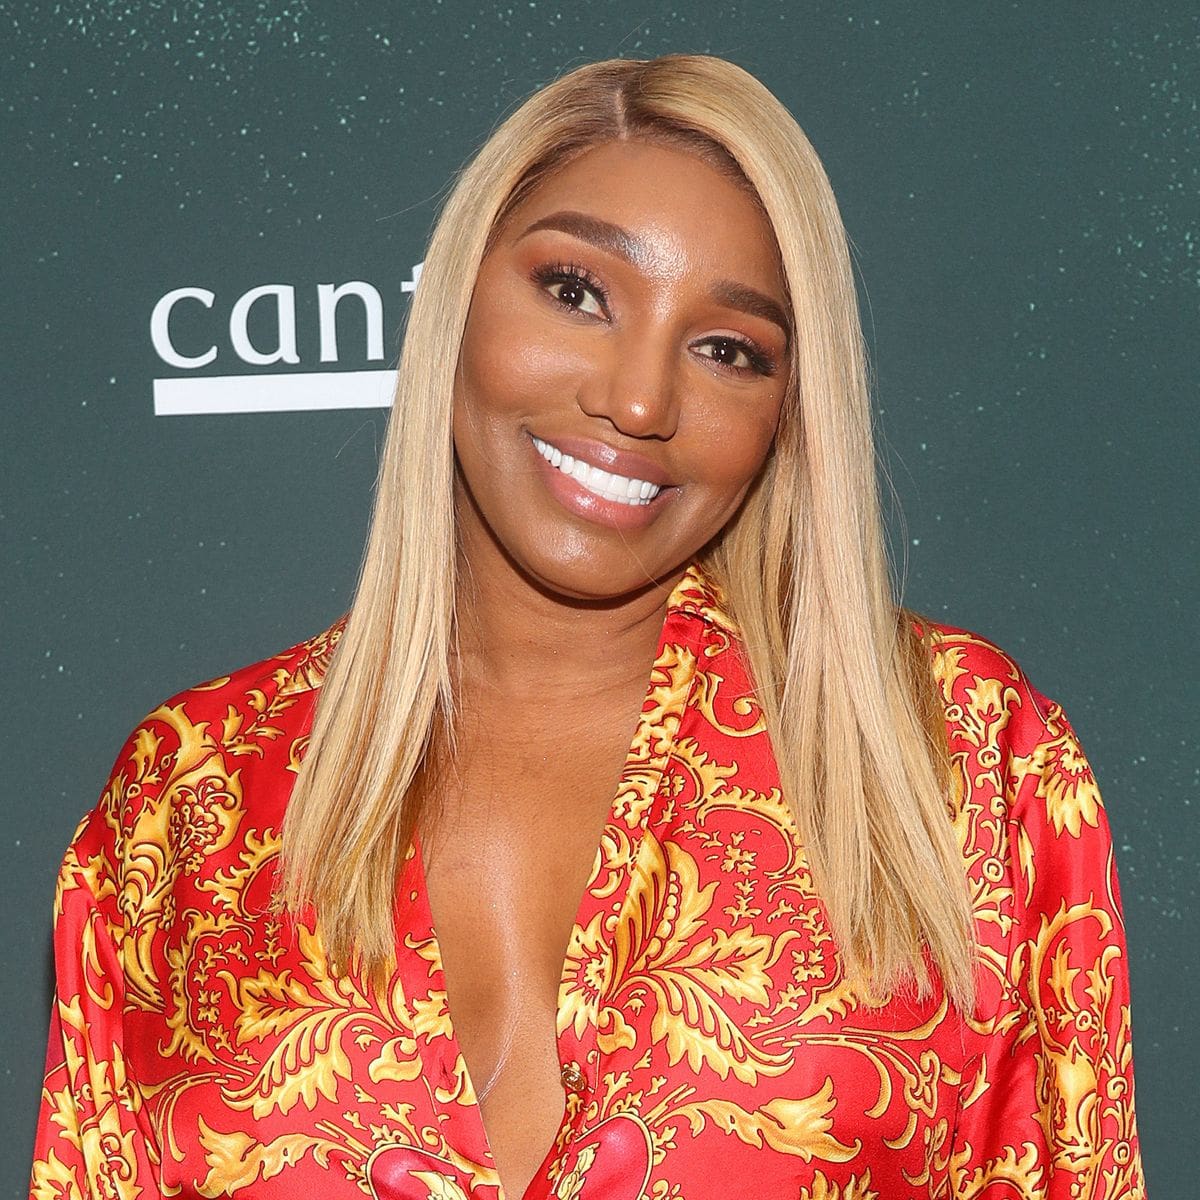 nene-leakes-is-grateful-for-the-good-people-in-her-life